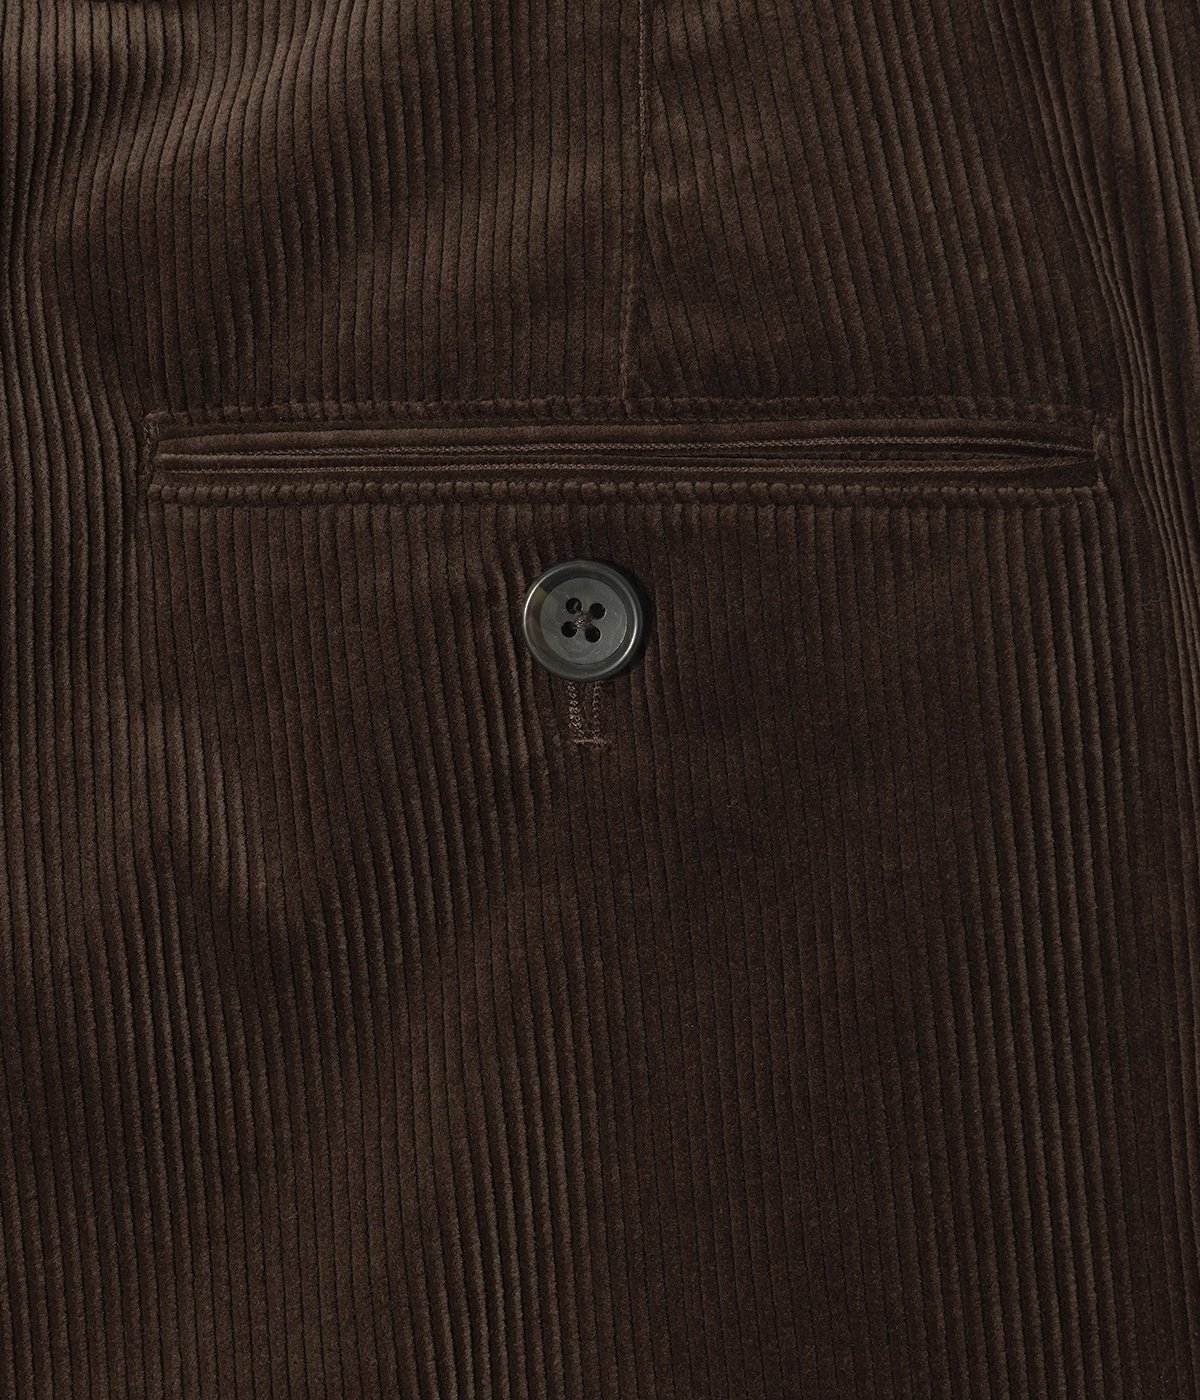 Corduroy Trousers | PORT BY ARK(ポートバイアーク) / パンツ